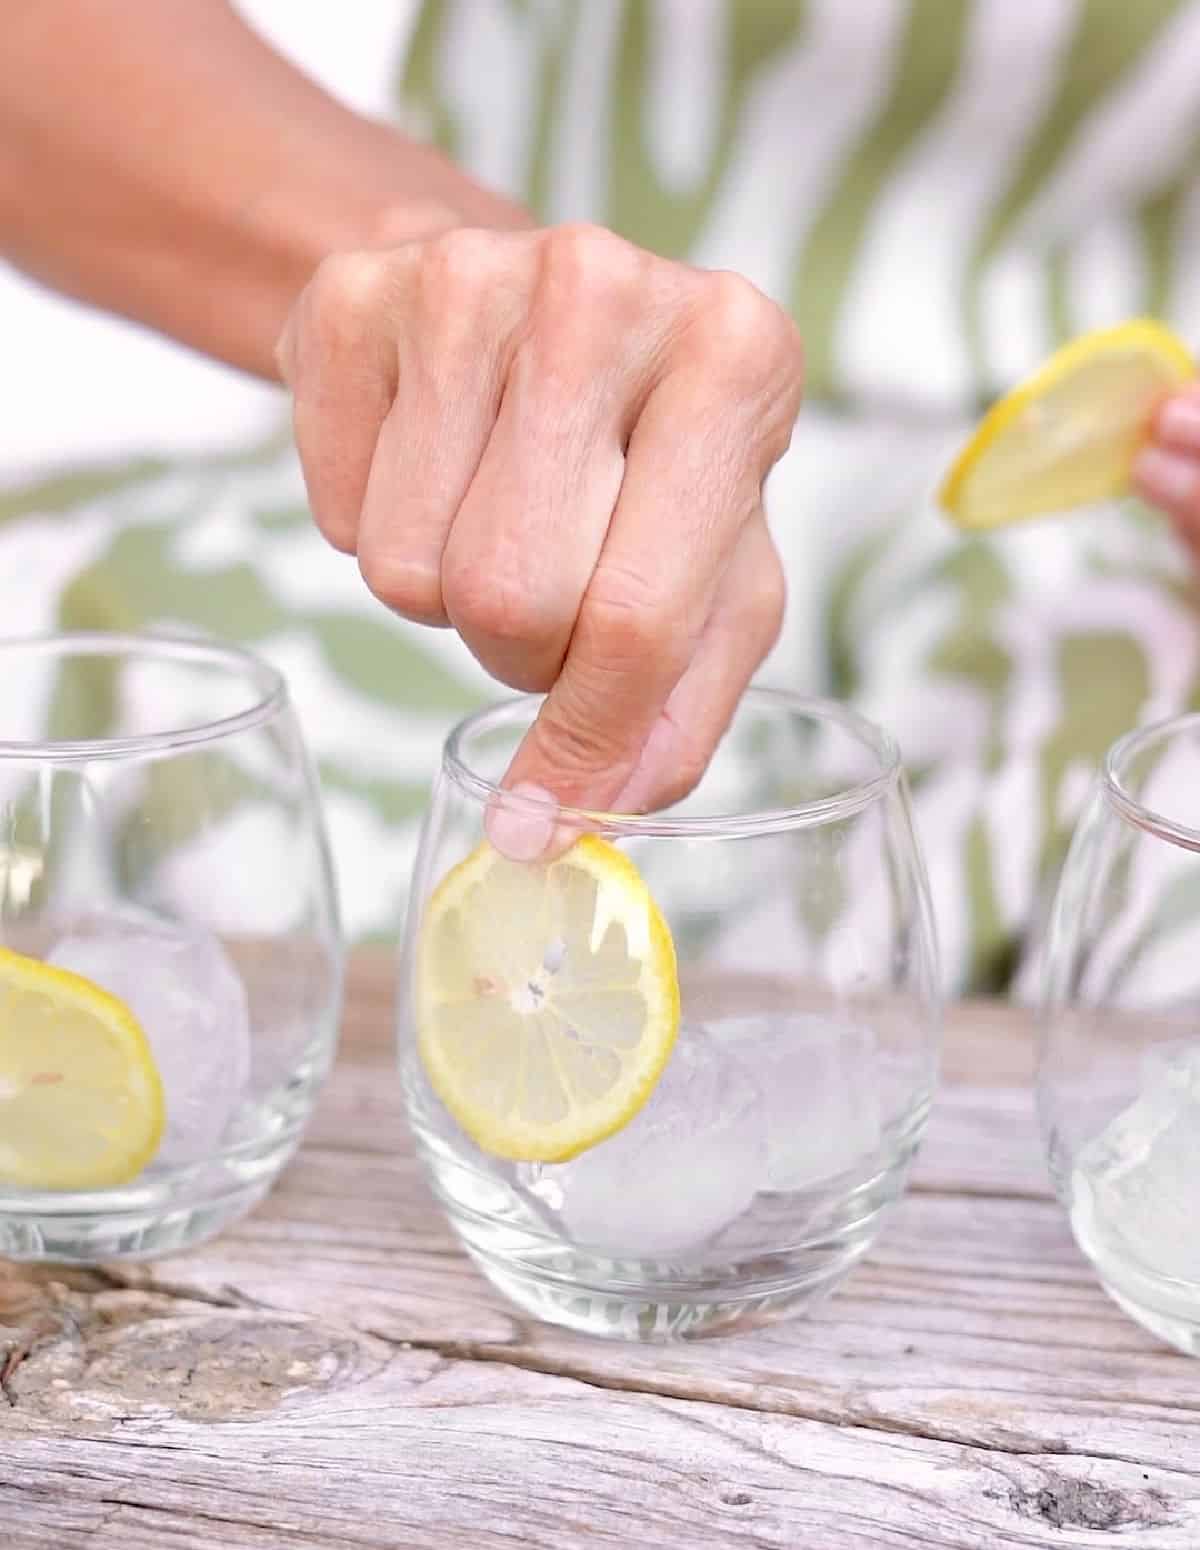 Hand placing lemon slices inside glasses on a greyish wood table. Green and white dress as background.